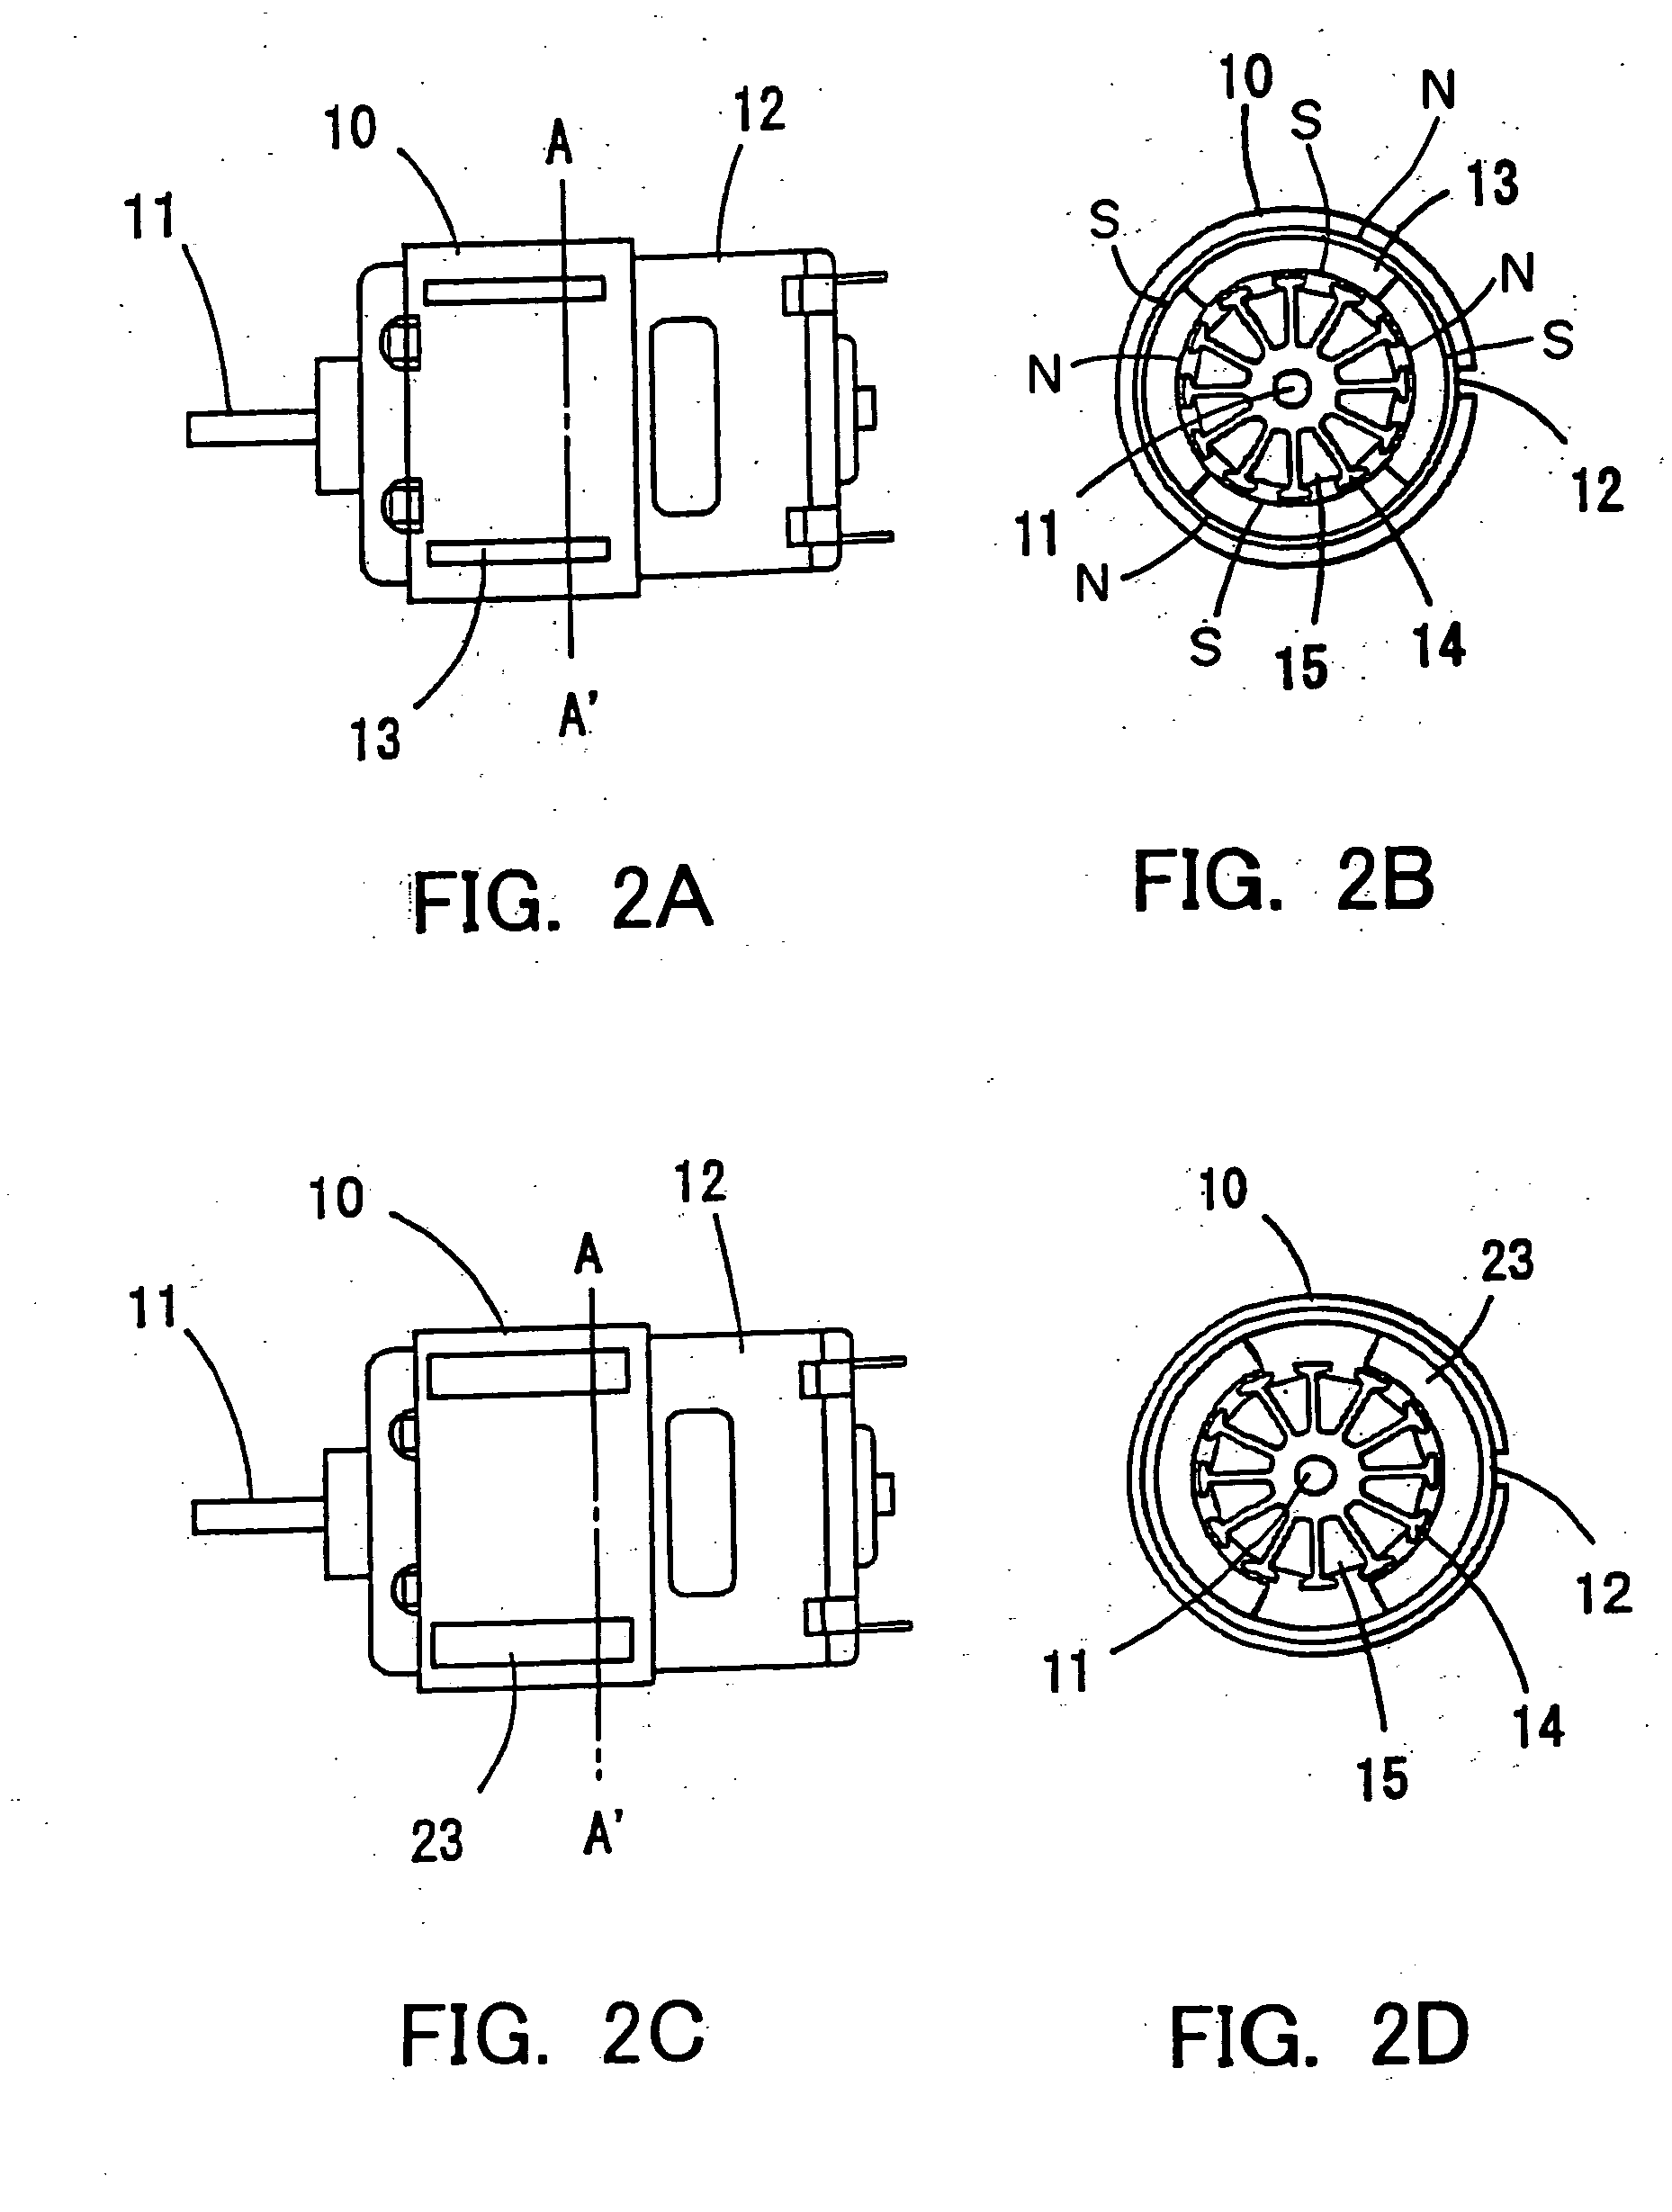 Motor and its permanent magnet